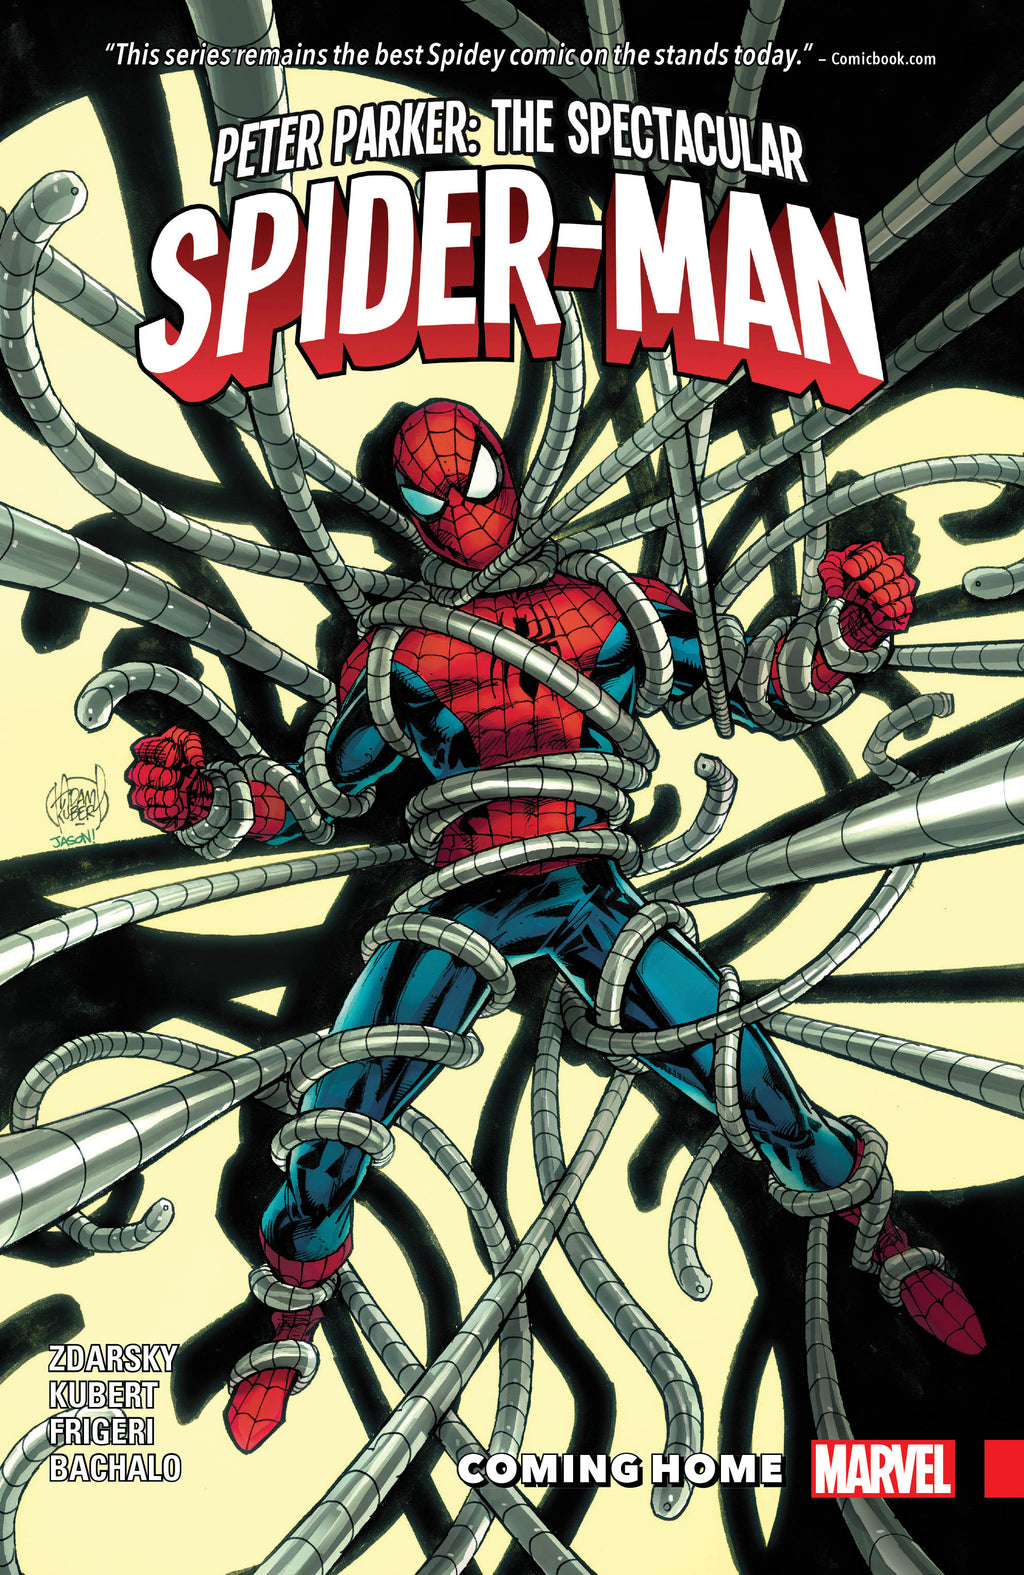 Peter Parker : The Spectacular Spider-Man Volume 4 Coming Home - The Comic Warehouse